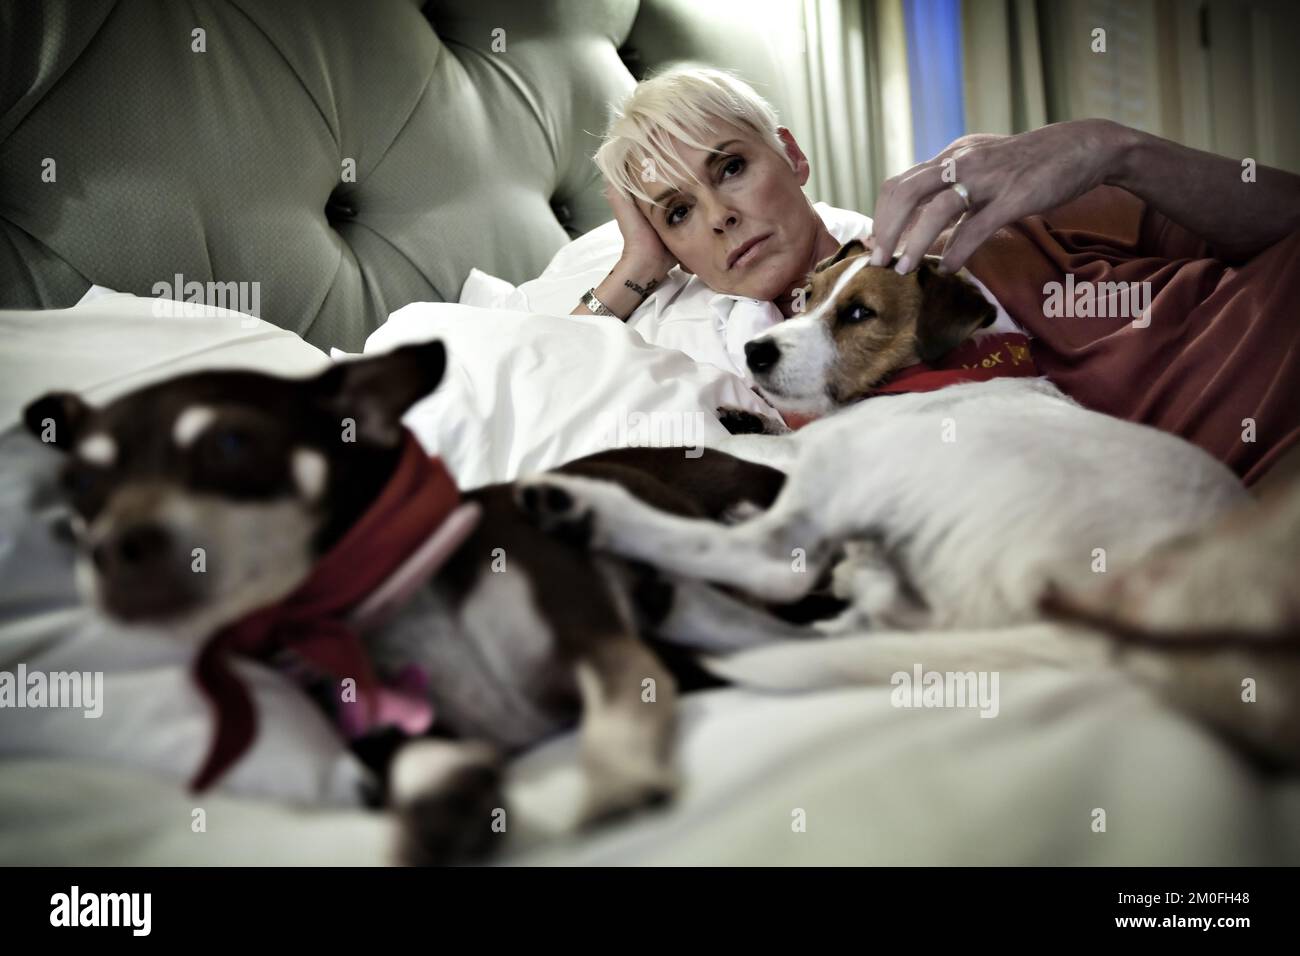 The Danish Actress Brigitte Nielsen lives in Hollywood Hillls with her 15 years younger husband Mattia Dessi and their two dogs Tootsie and Joker. She still performs in reality- and tv-shows, and has just started as advice columnist for the Danish newspaper Ekstra Bladet. PHOTOGRAPHER BENJAMIN KÃœRSTEN / POLFOTO Stock Photo